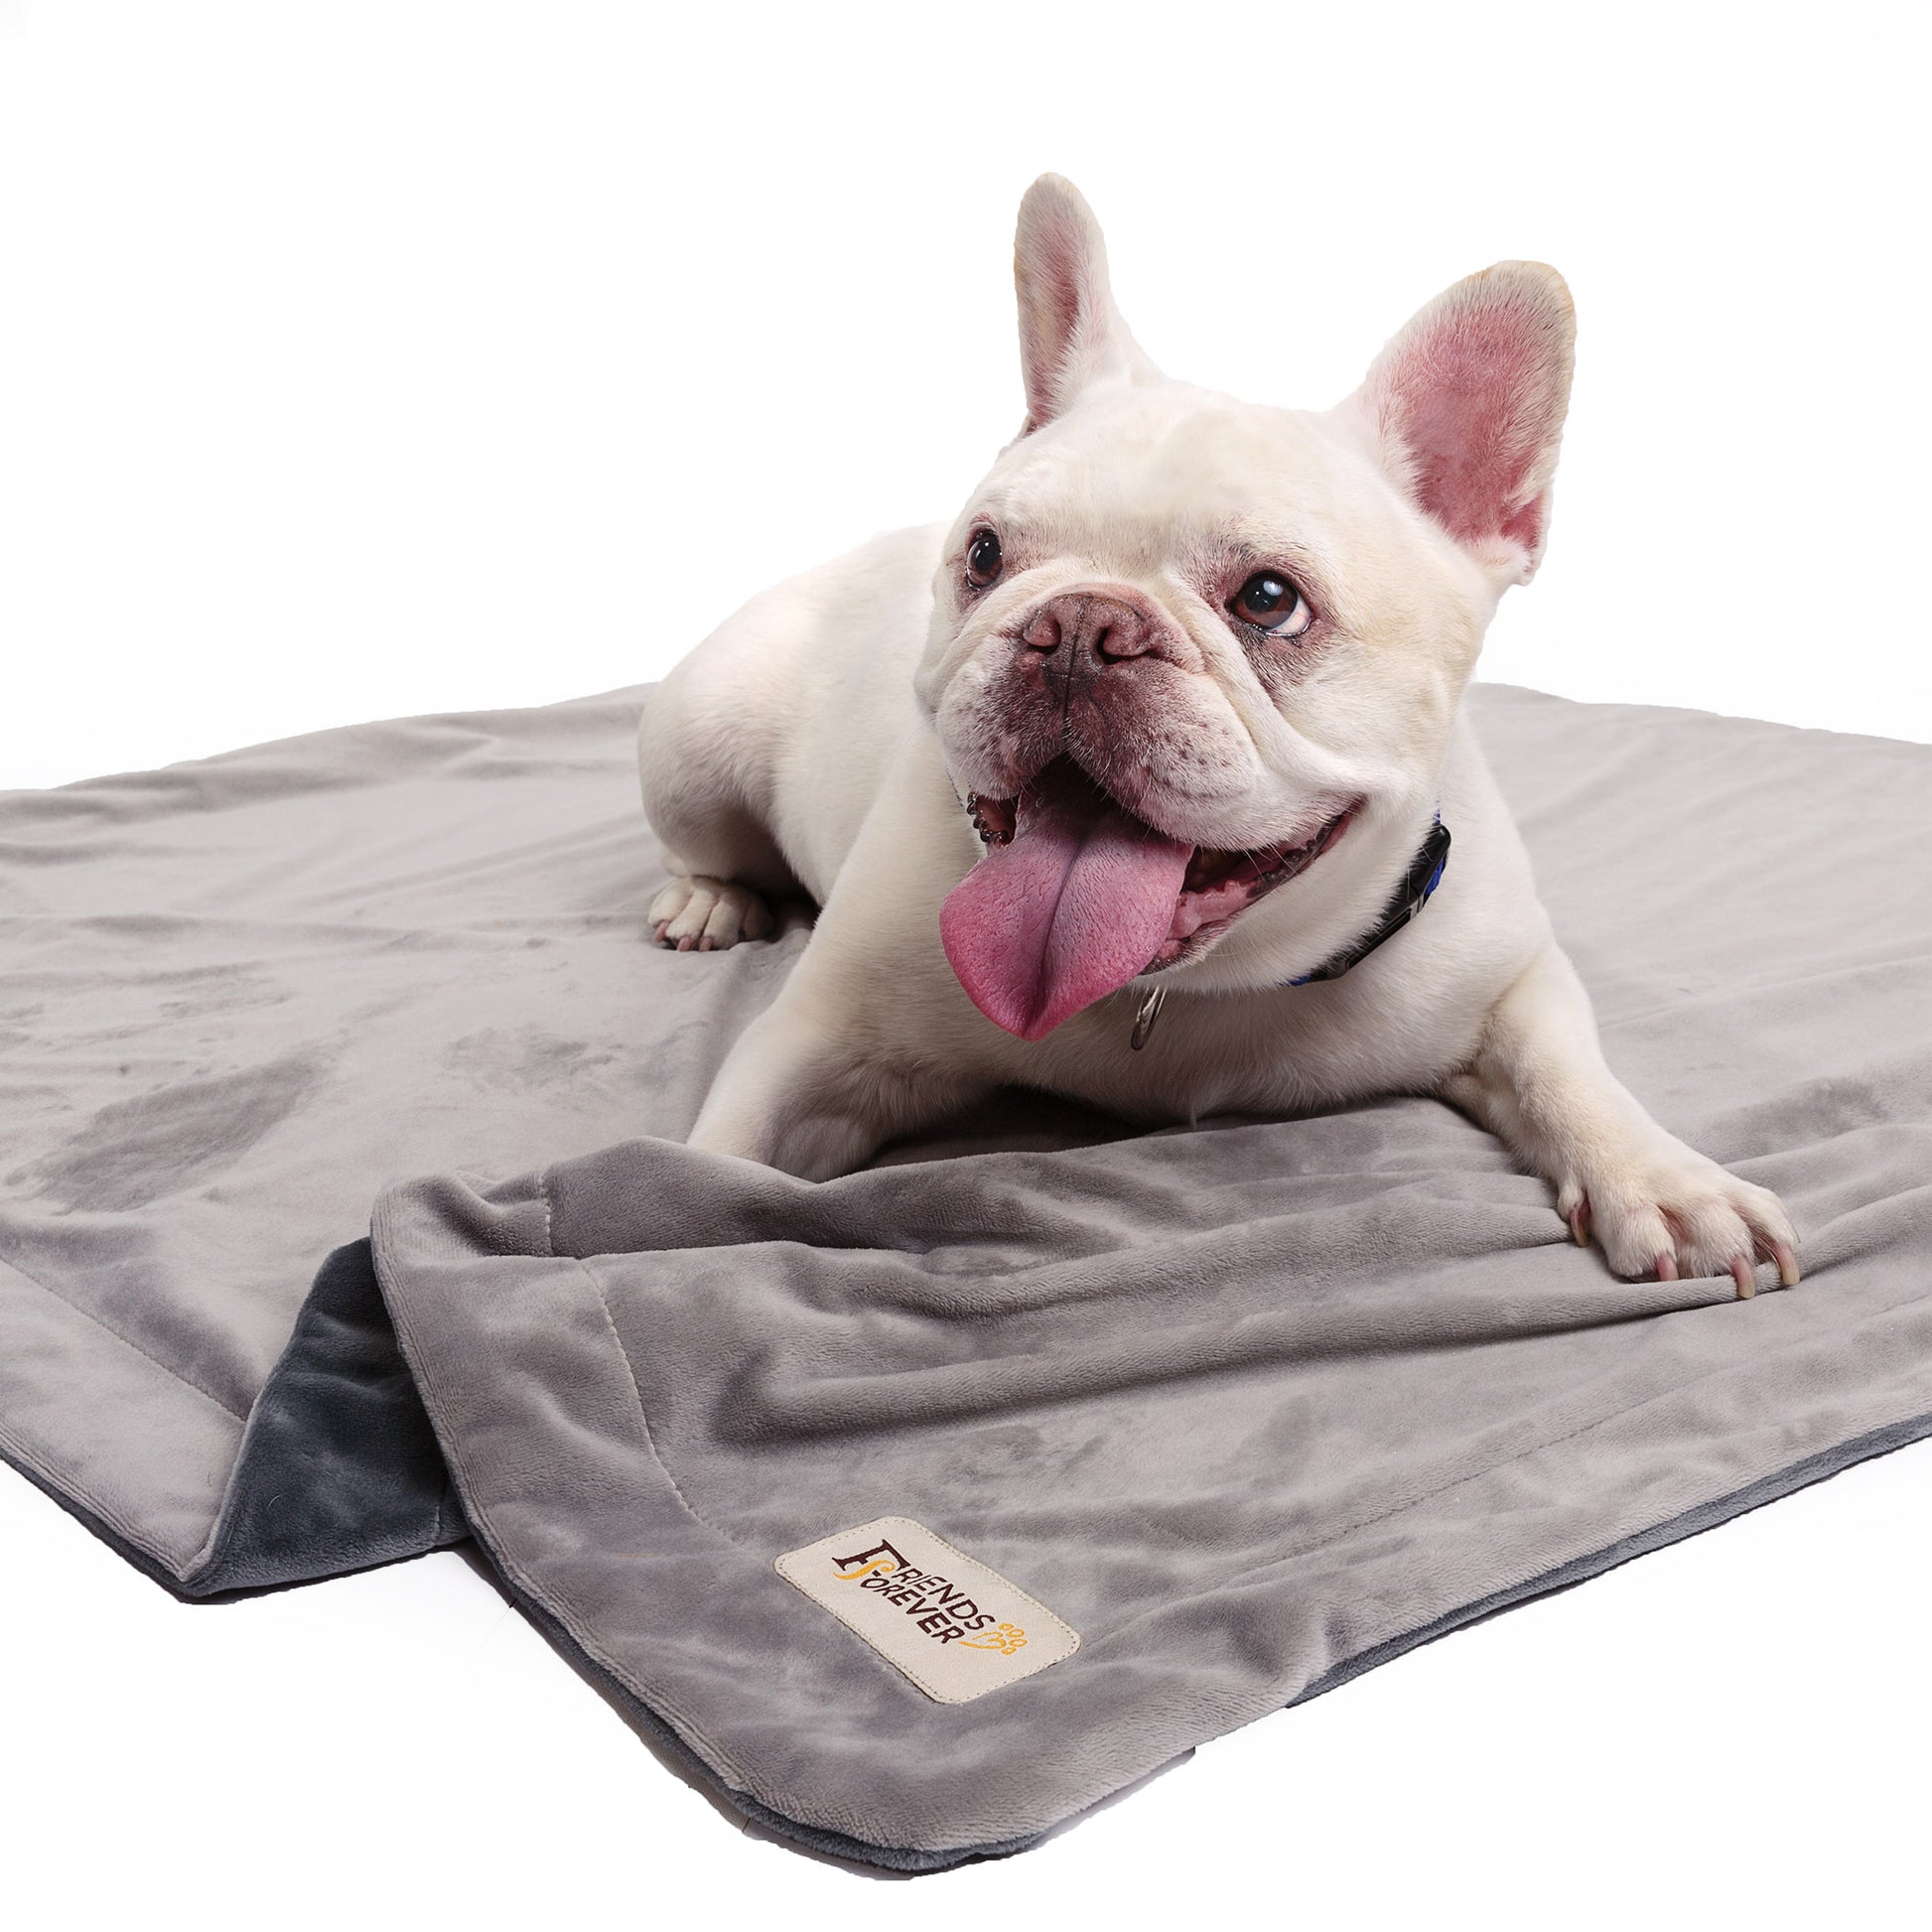 Dog Blanket for Couch Protection | Reversible Pet Hair Resistant Dog Throw - Bailey